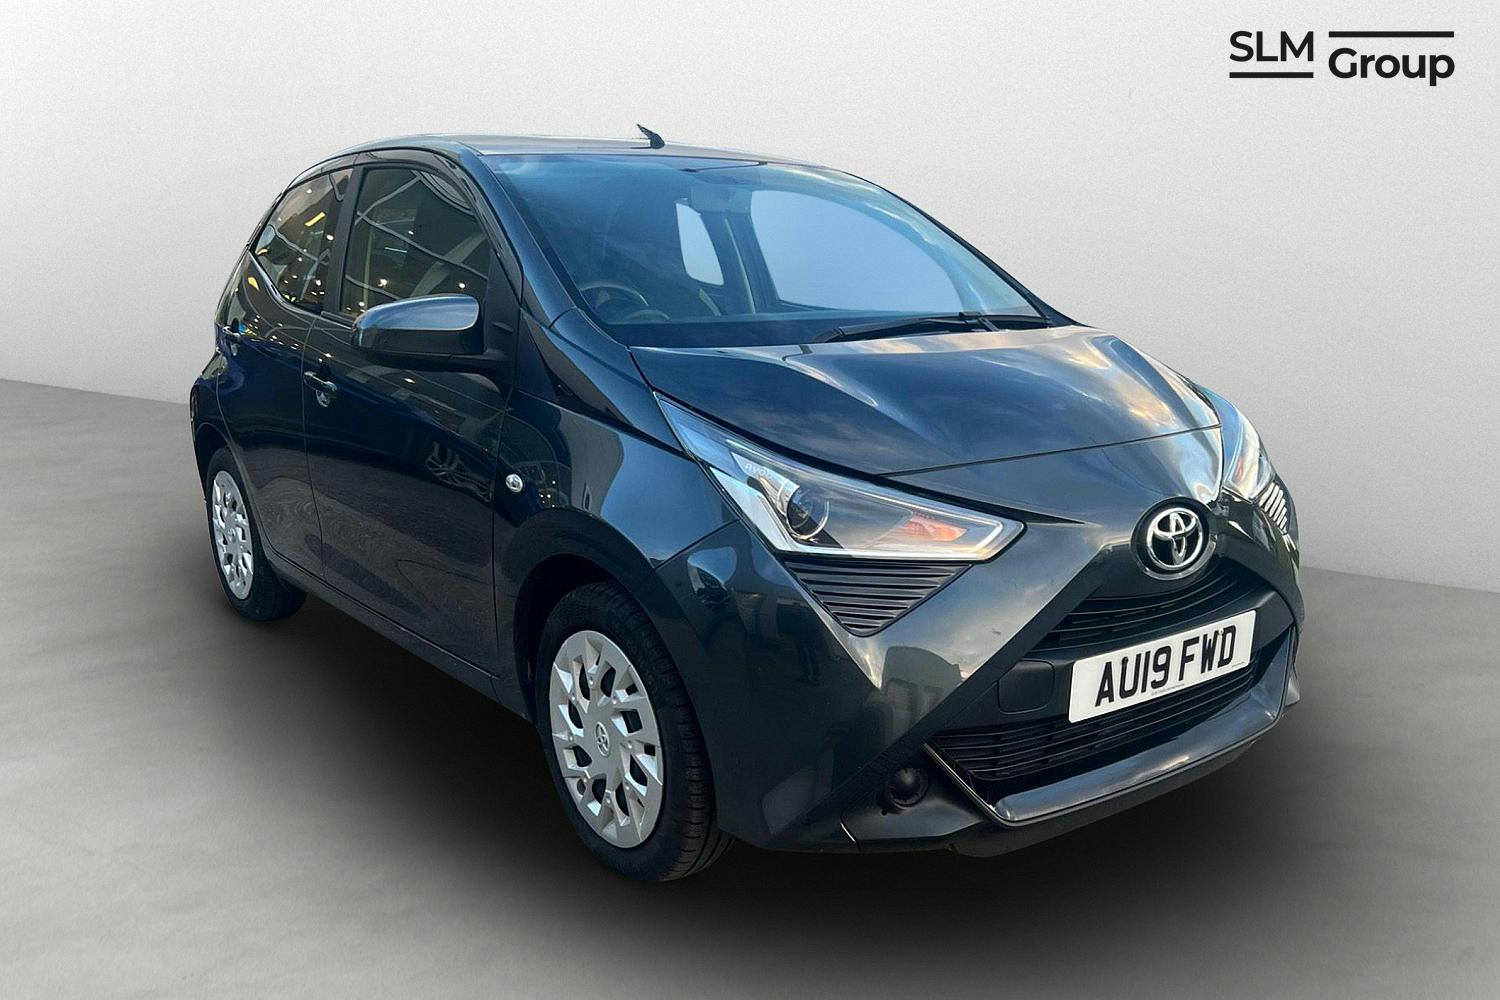 Toyota Aygo 1.0 Vvt I X Play 5Dr 2019 For Sale In Norwich, Norfolk From  Toyota Au19Fwd